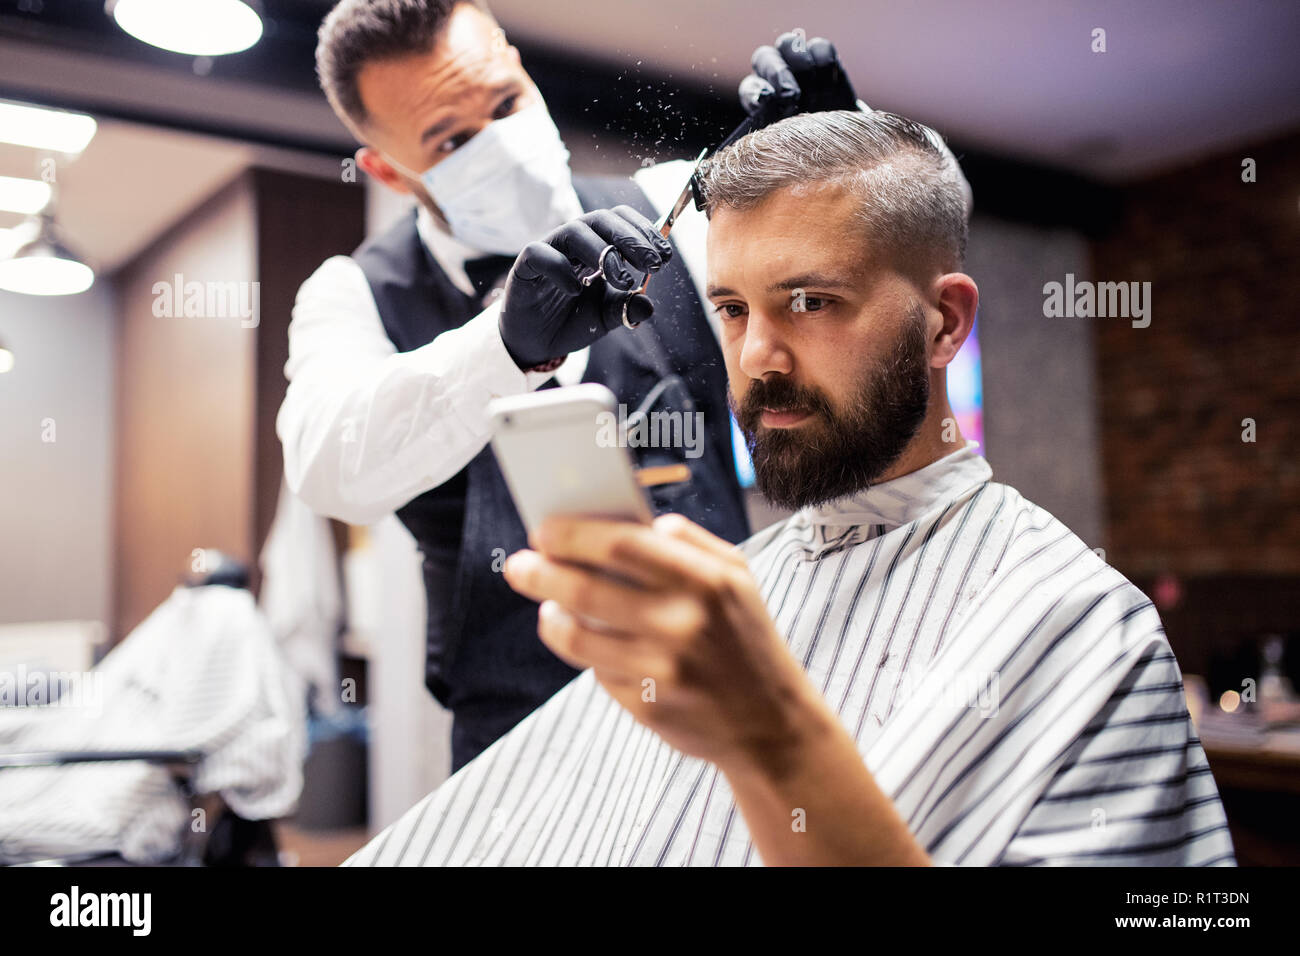 Hipster man client visiting haidresser and hairstylist in barber shop, taking selfie. Stock Photo